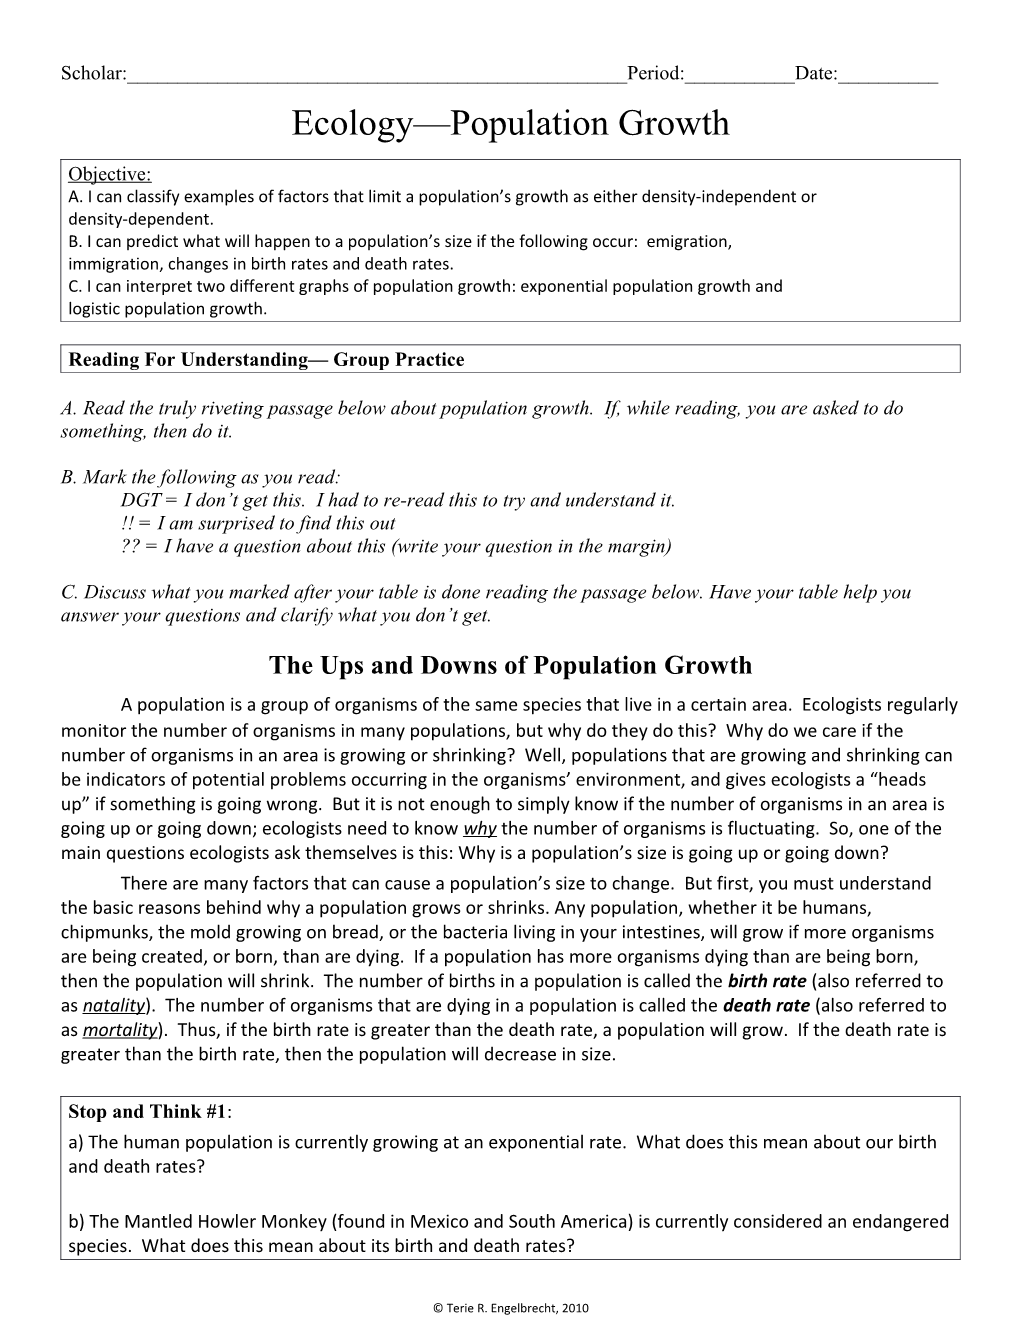 Ecology Unit: Population Growth Activities (Objective #2)